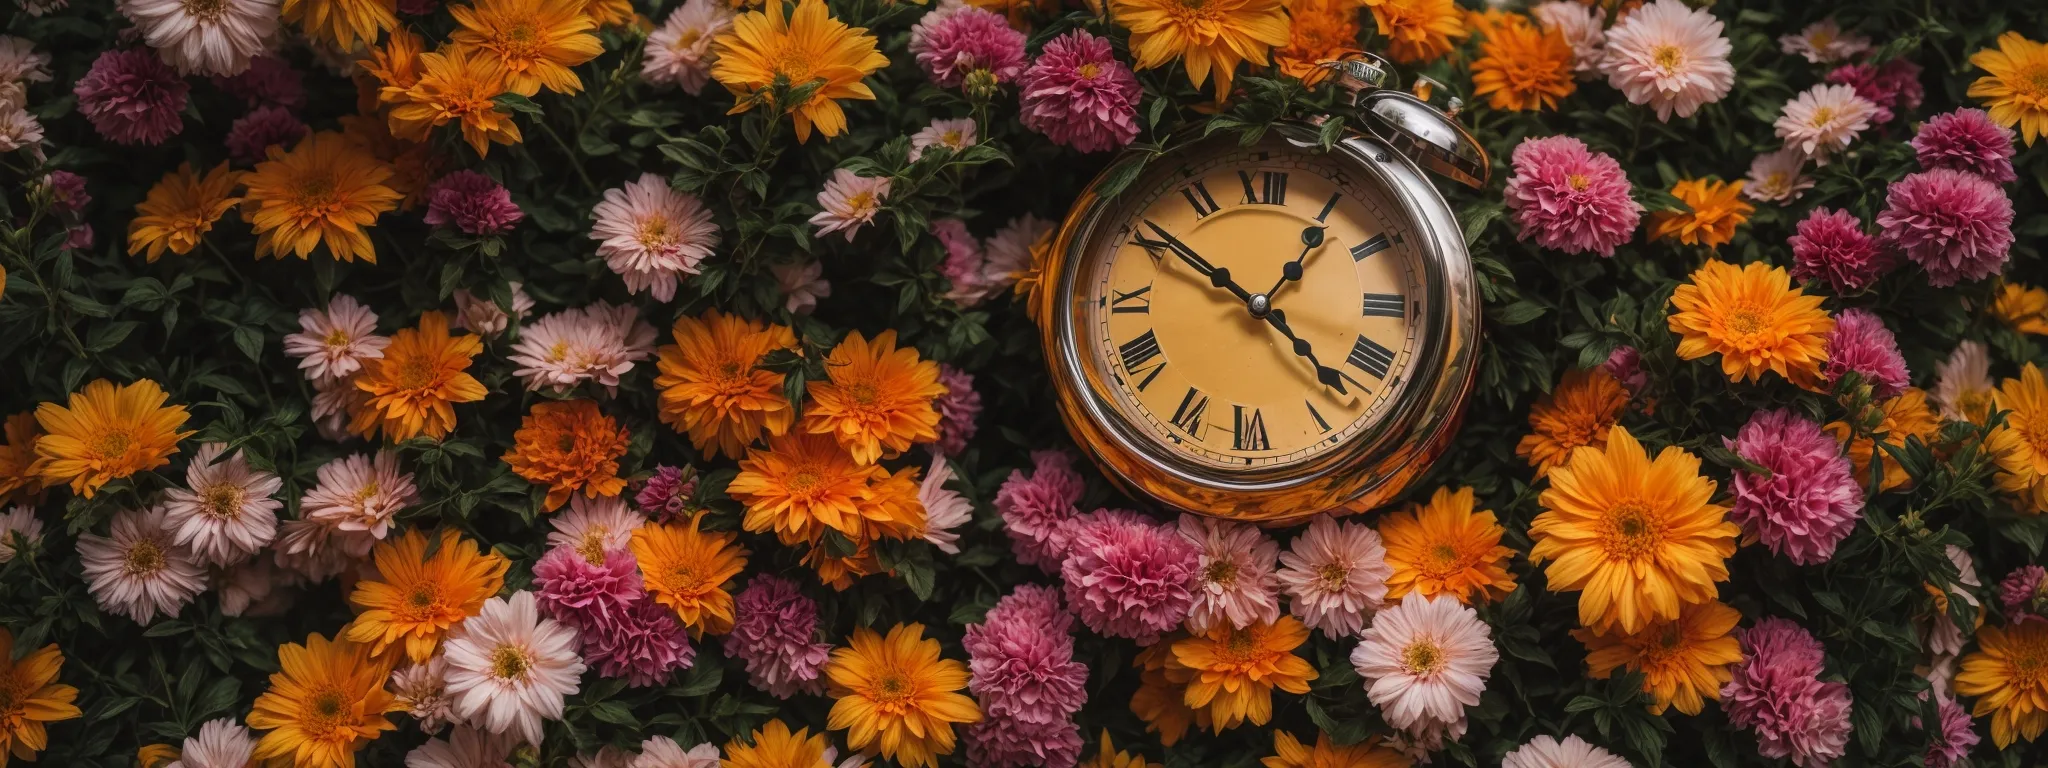 a clock nestled in a bed of flowers, symbolizing the growth and patience required in seo maturation.